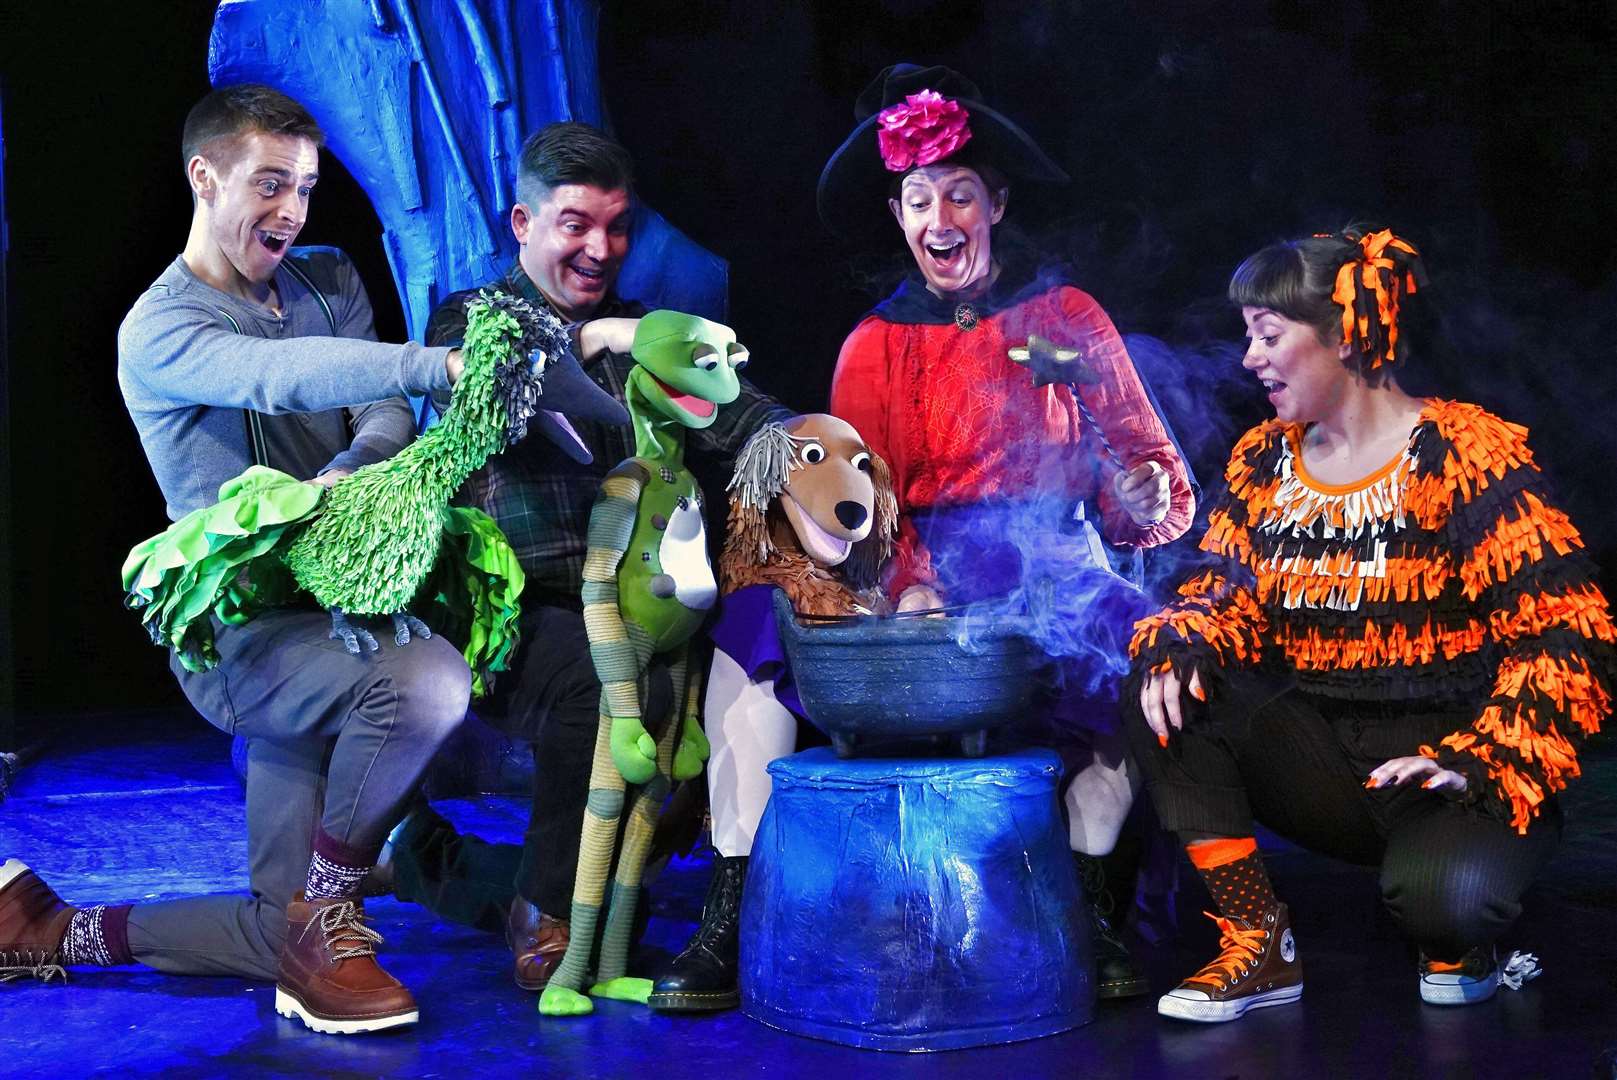 Room on the Broom is coming to The Orchard Theatre on Monday, March 25